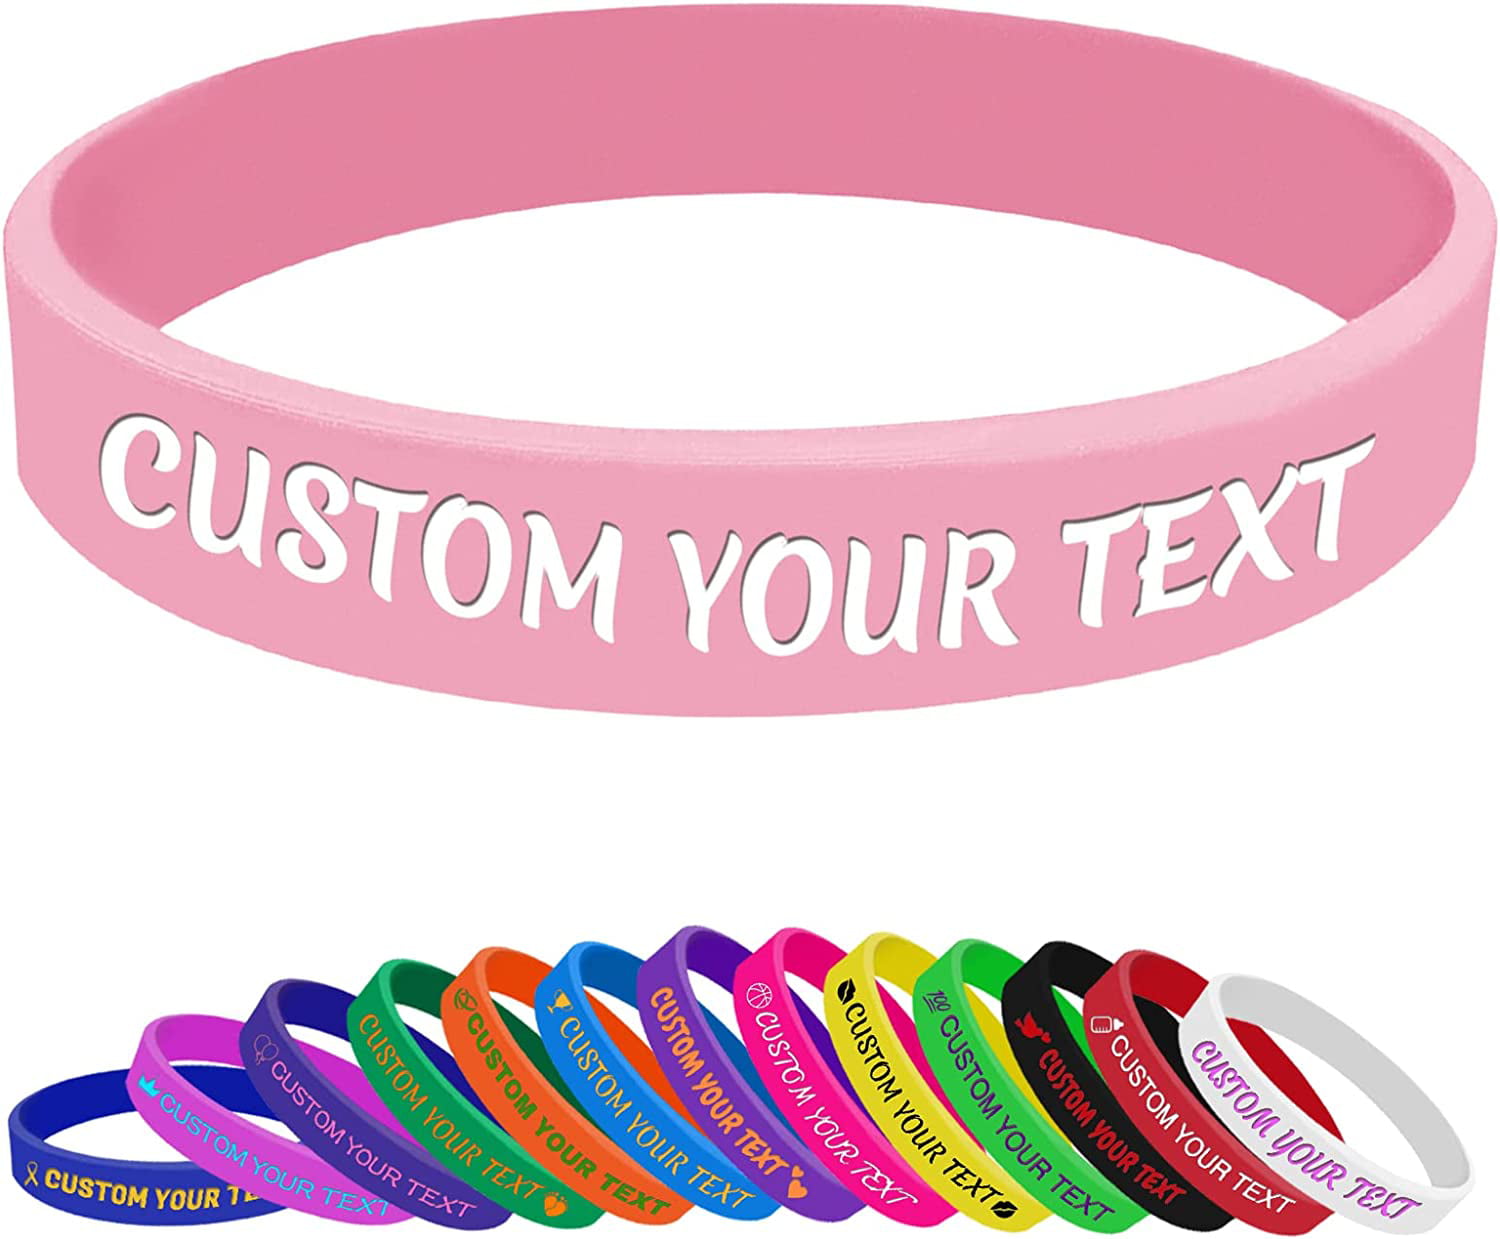 High Quality Bands FAST 40 Custom Silicone Wristbands 